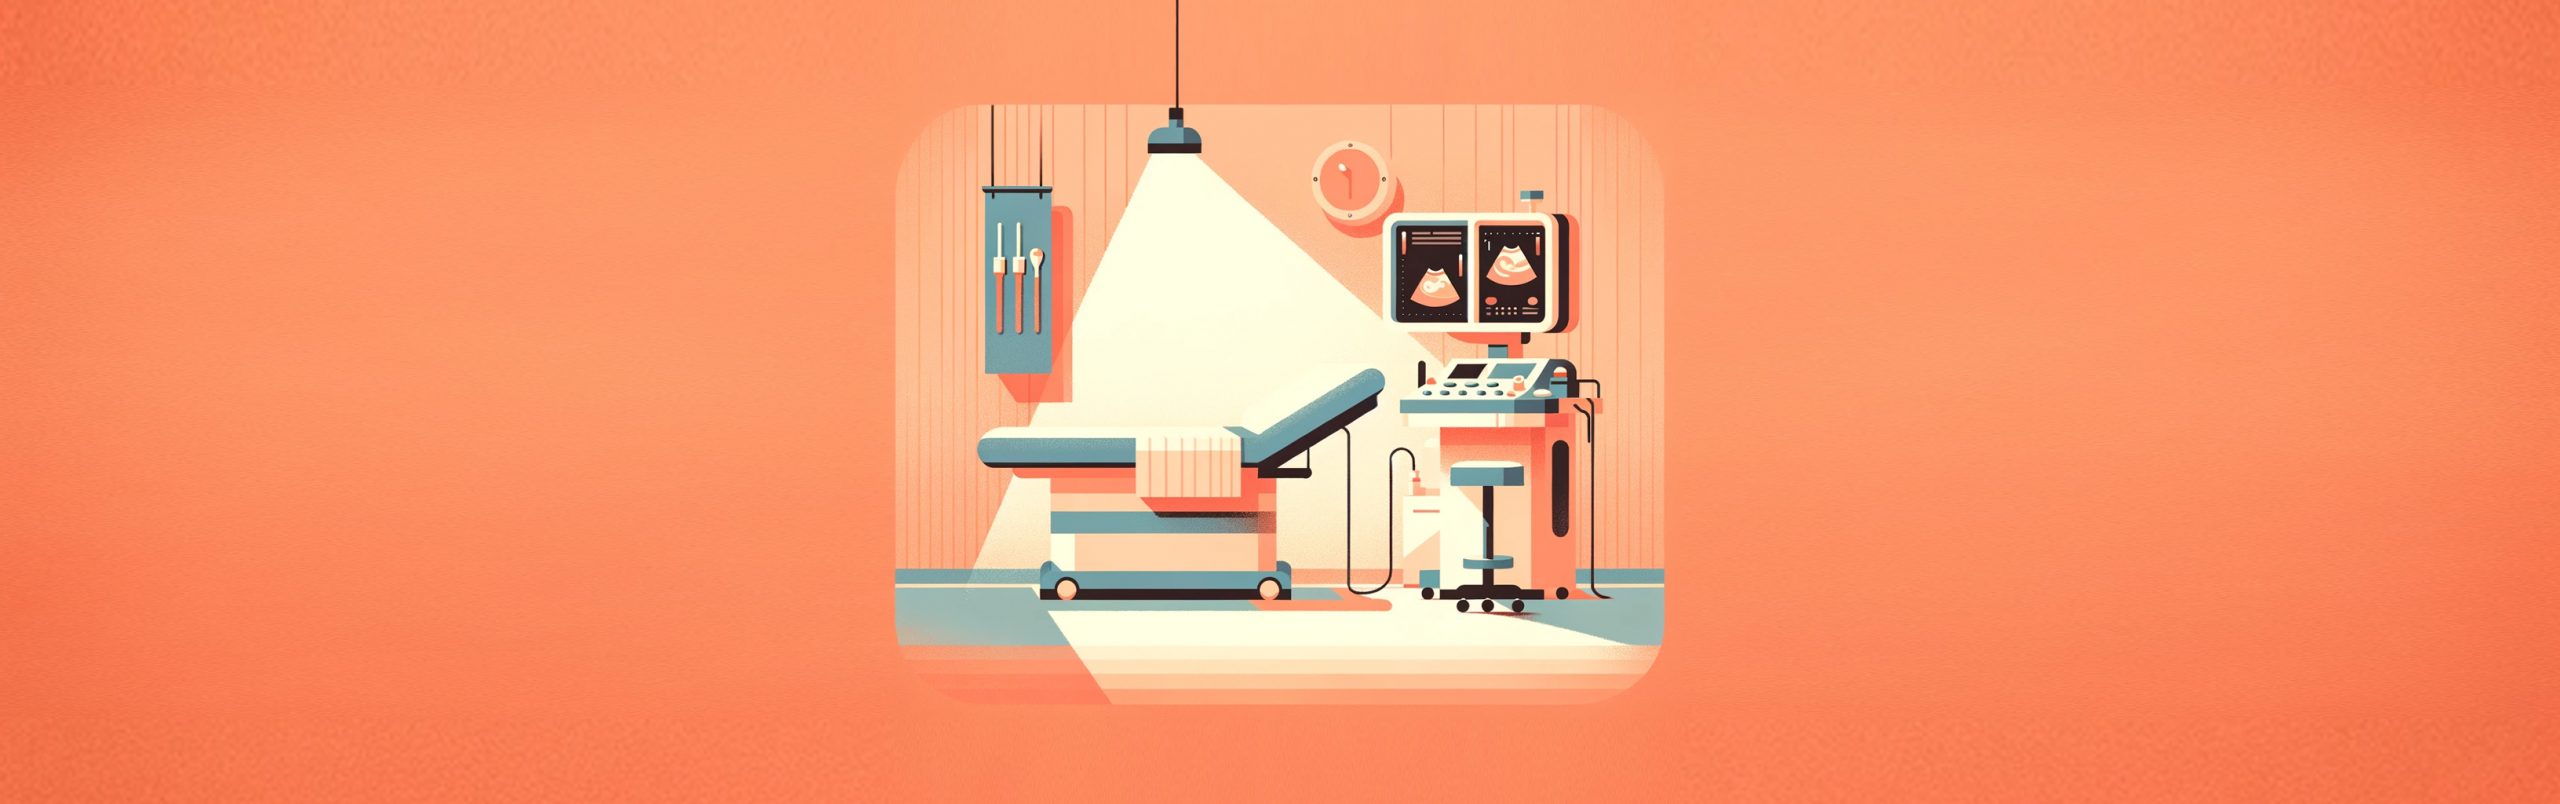 Minimalist flat design illustration of a very simple ultrasound room at the London Pregnancy Clinic - ultrasound Scans During Pregnancy.